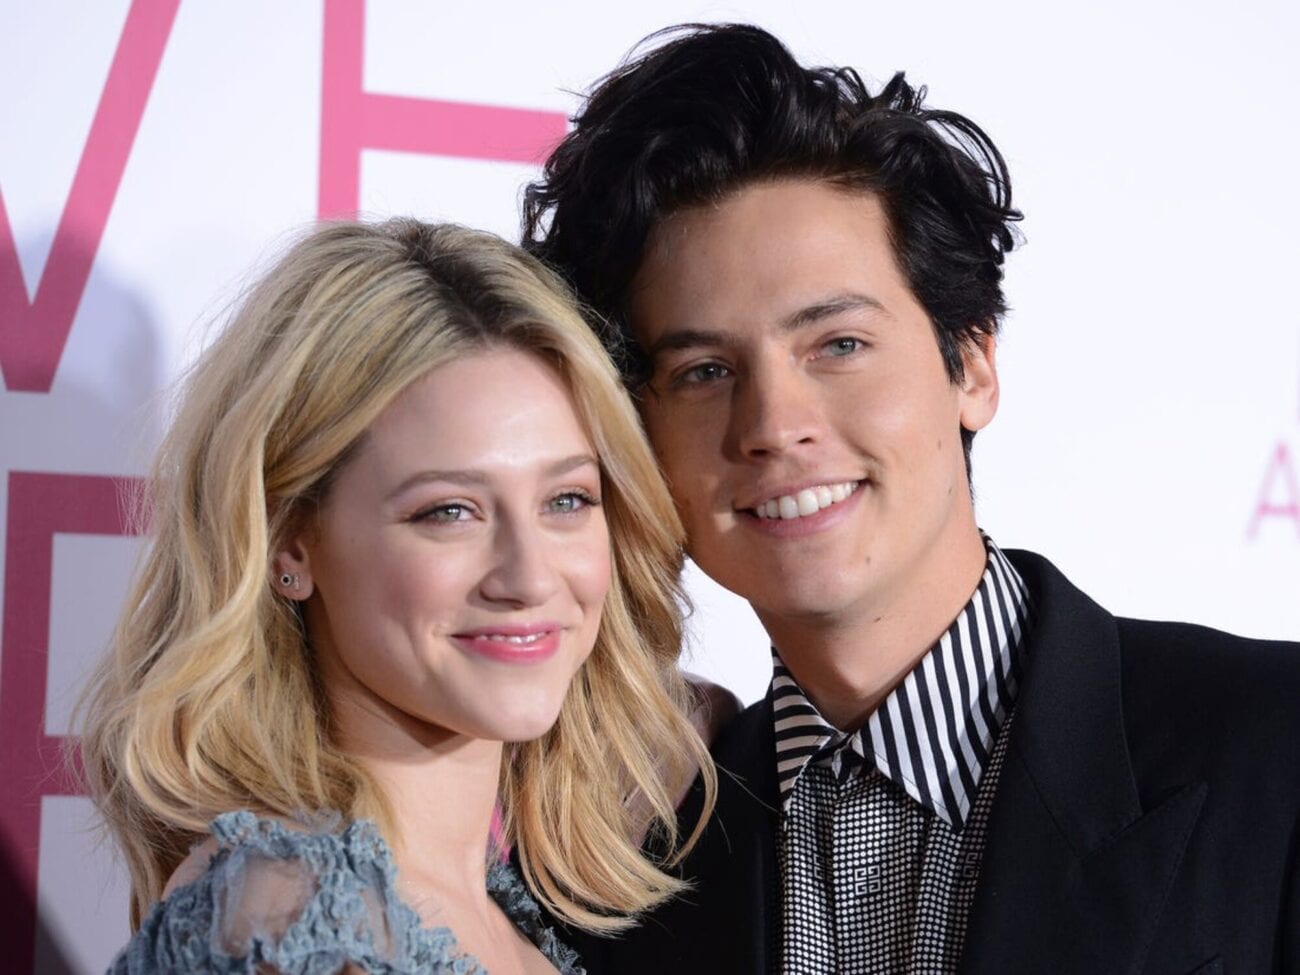 Stepping back on the 'Riverdale' set isn't going to be easy for Lili Reinhart and Cole Sprouse. Find out how Lili overcame the rough breakup.